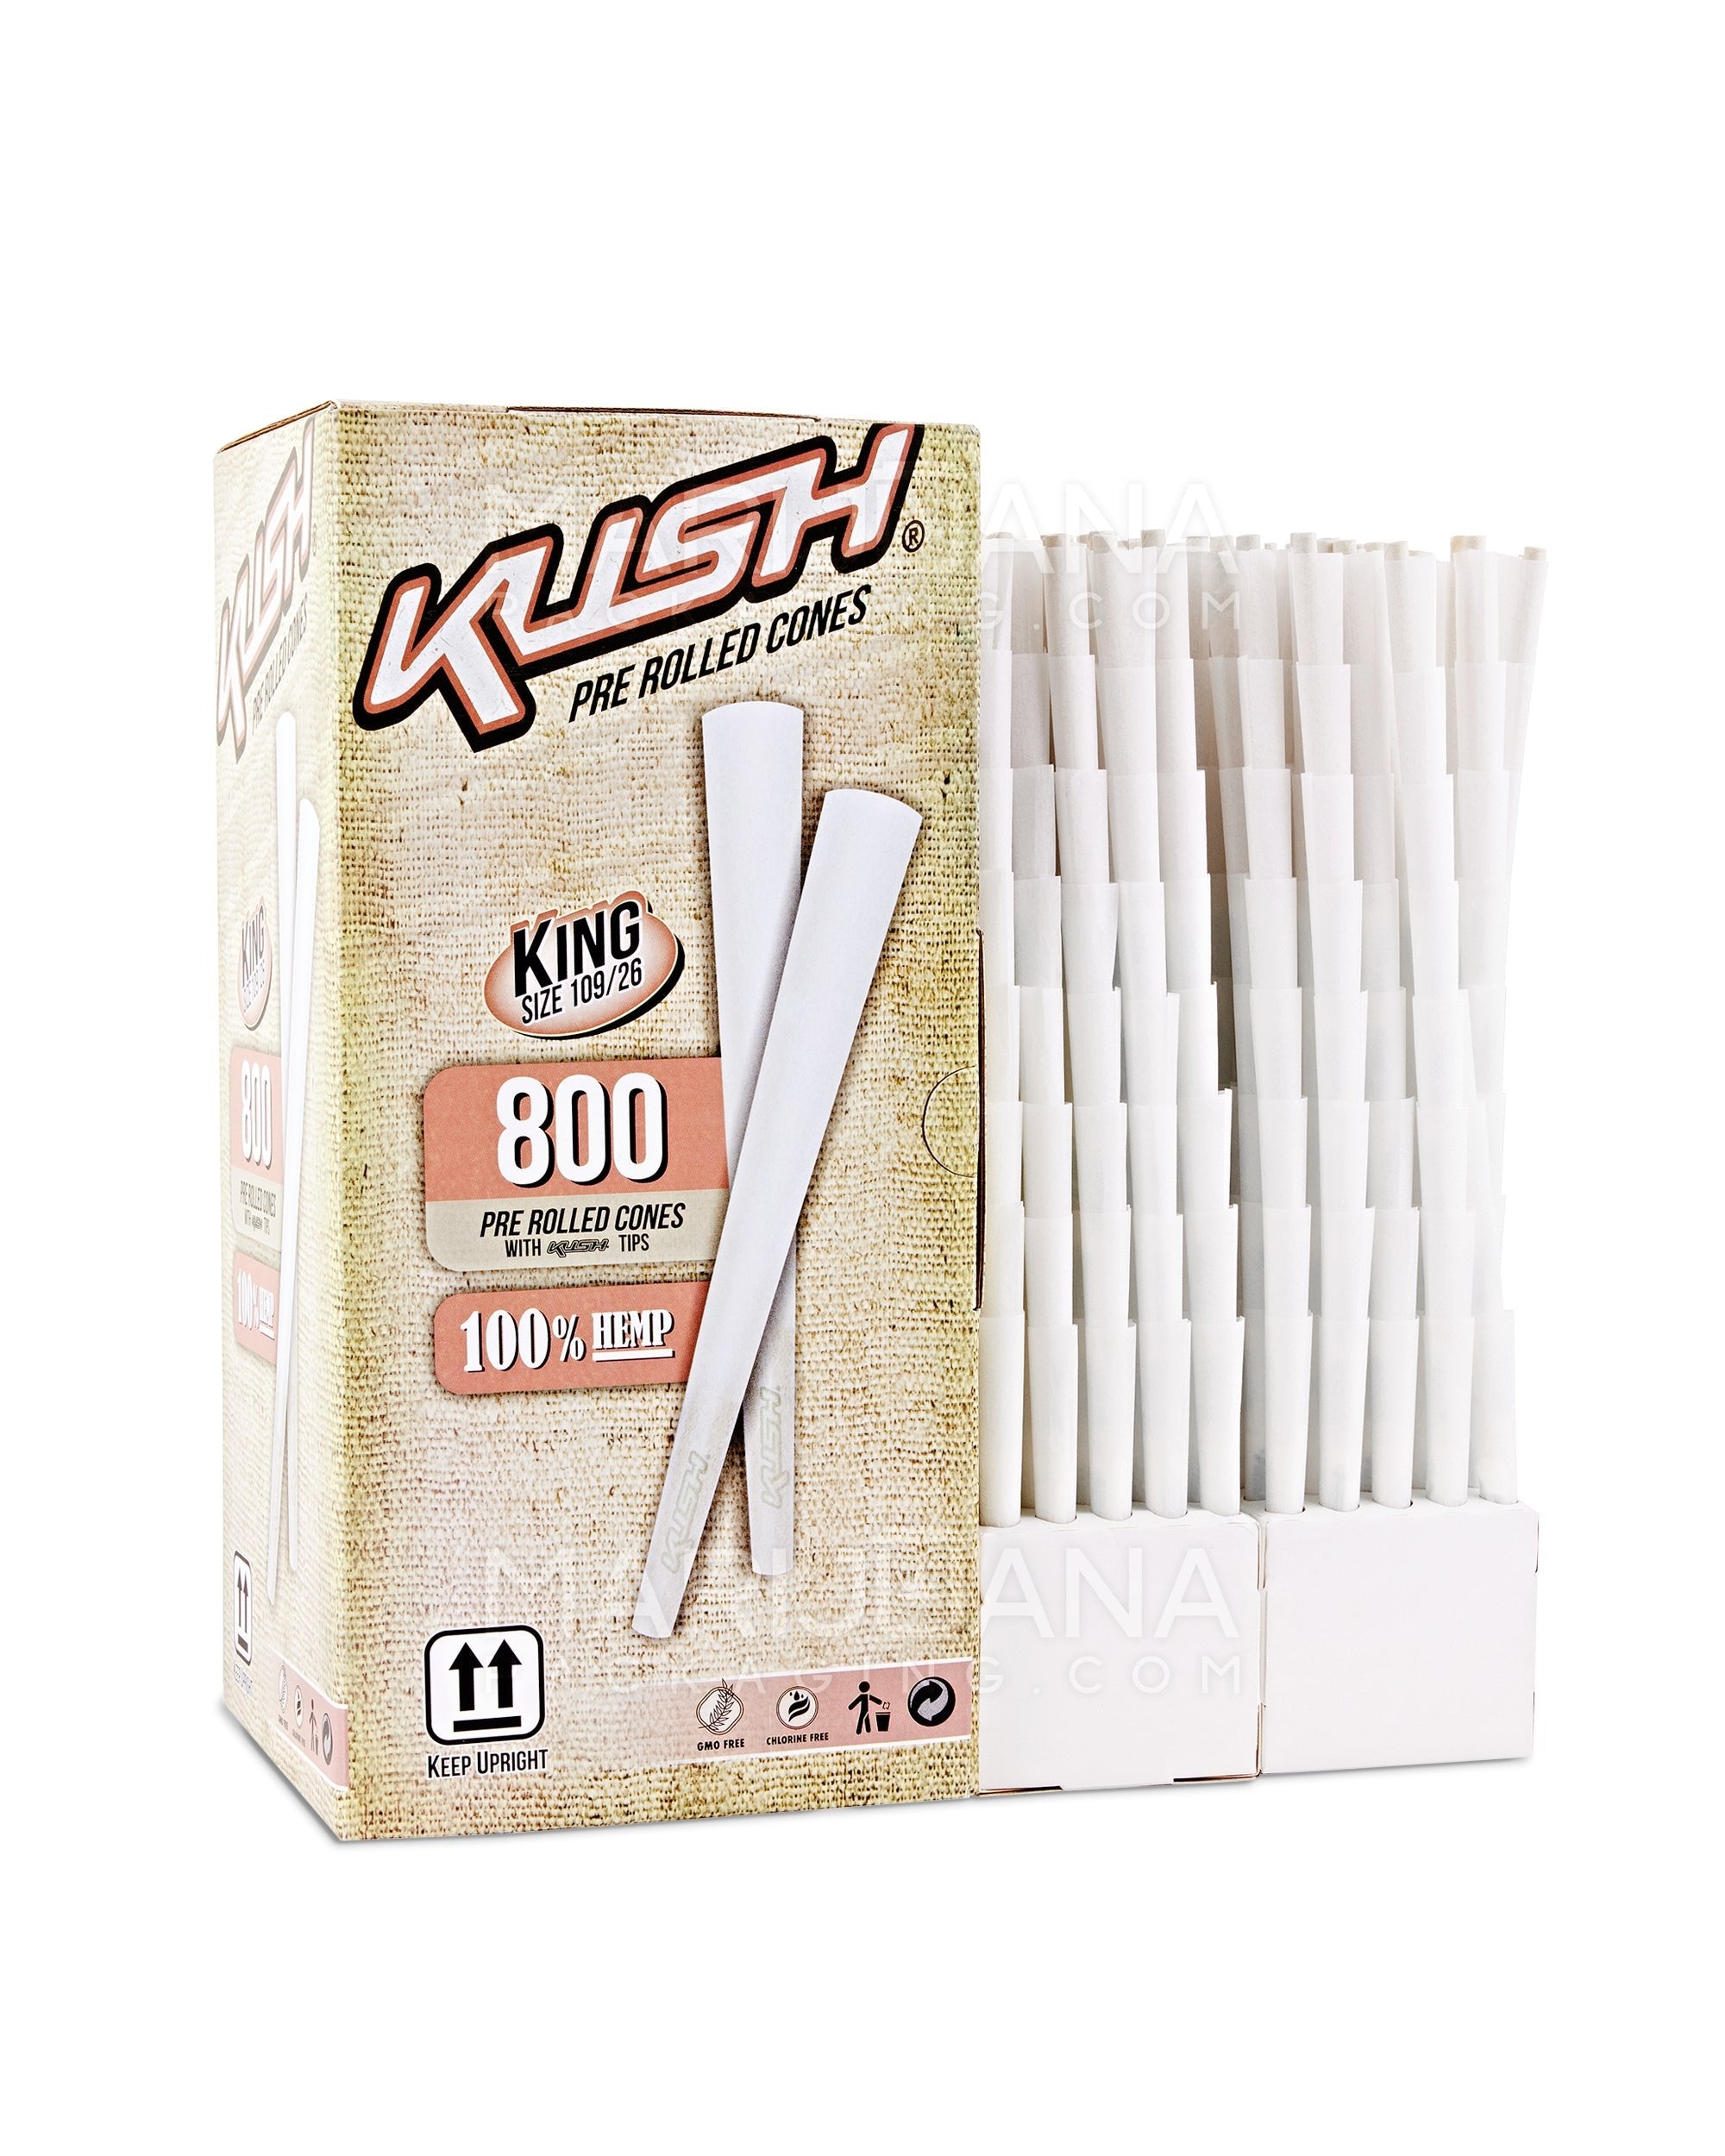 KUSH | Bleached King Size Pre-Rolled Cones w/ Filter Tip | 109mm - Hemp Paper - 800 Count - 2